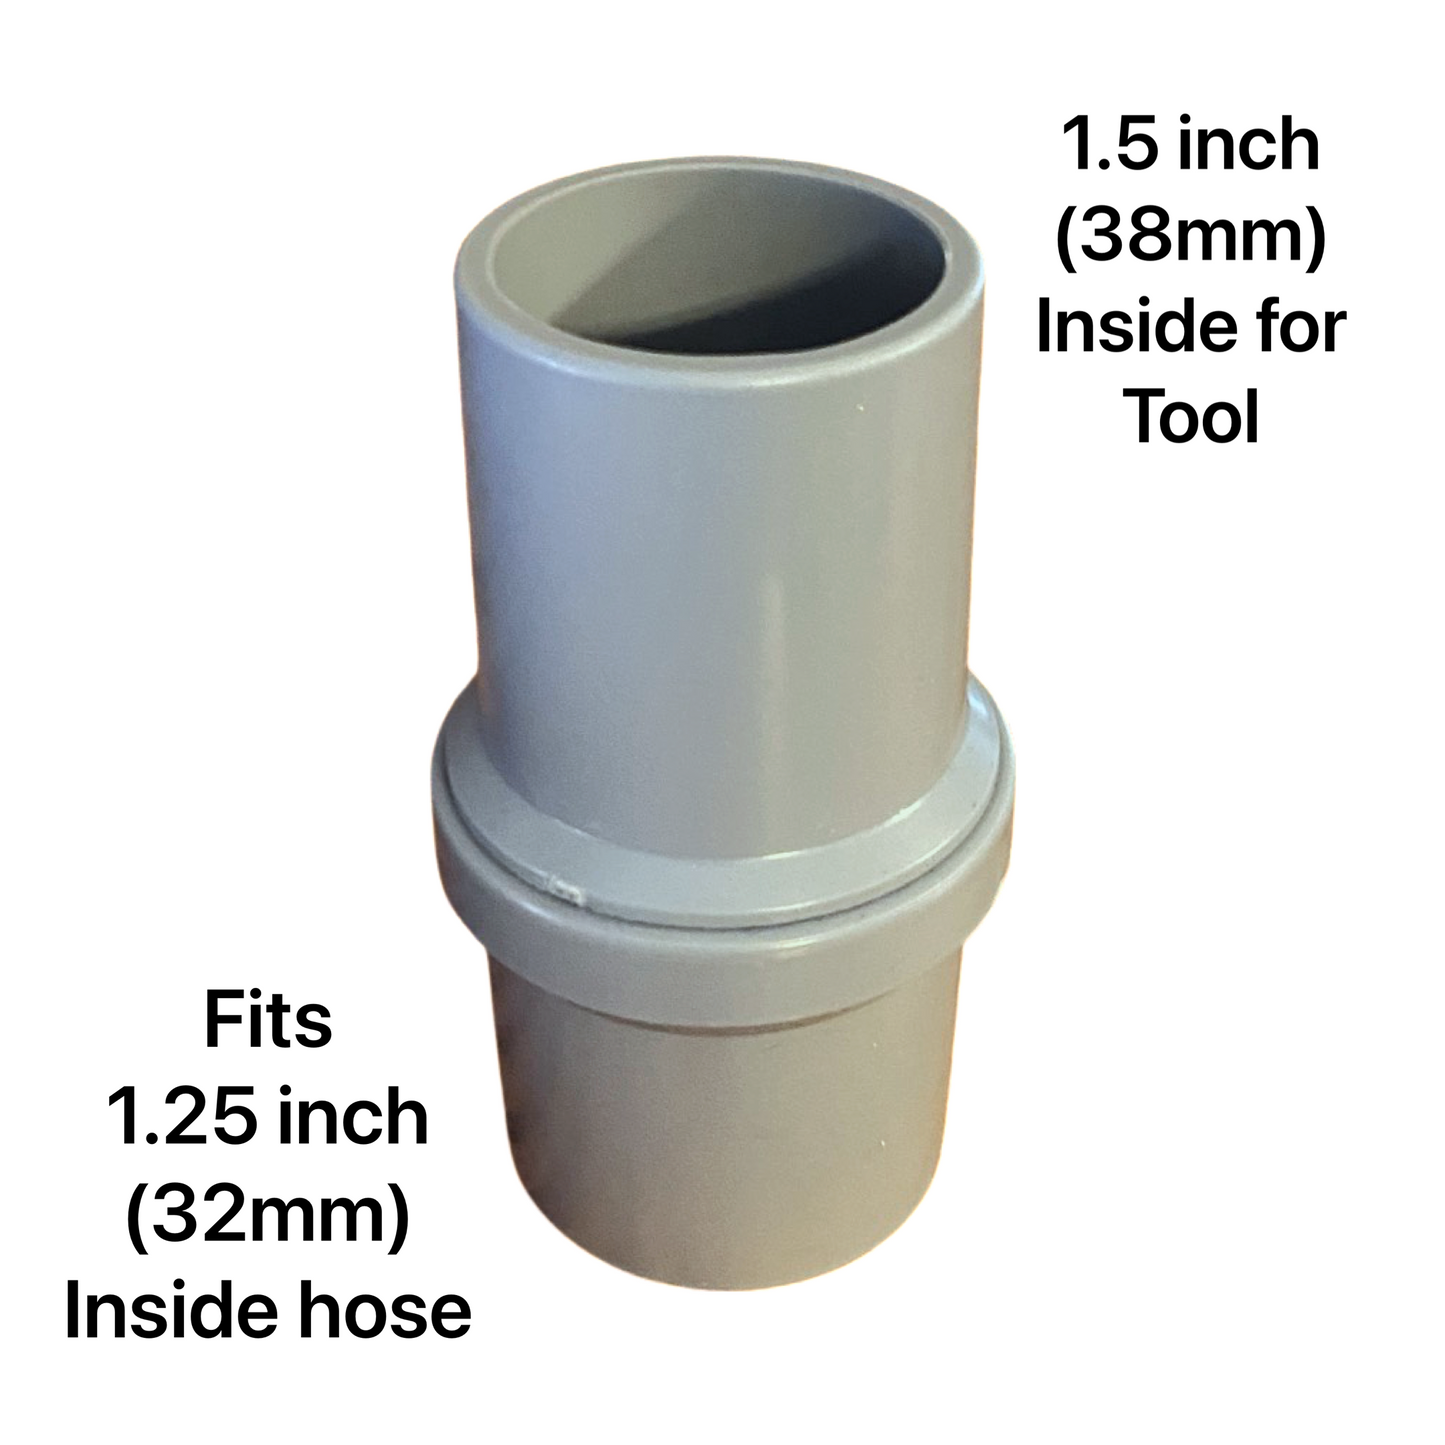 Adapter (E)  Swivel Cuff (1 and 1/4 inch hose to 1 and 1/2 inch tool)